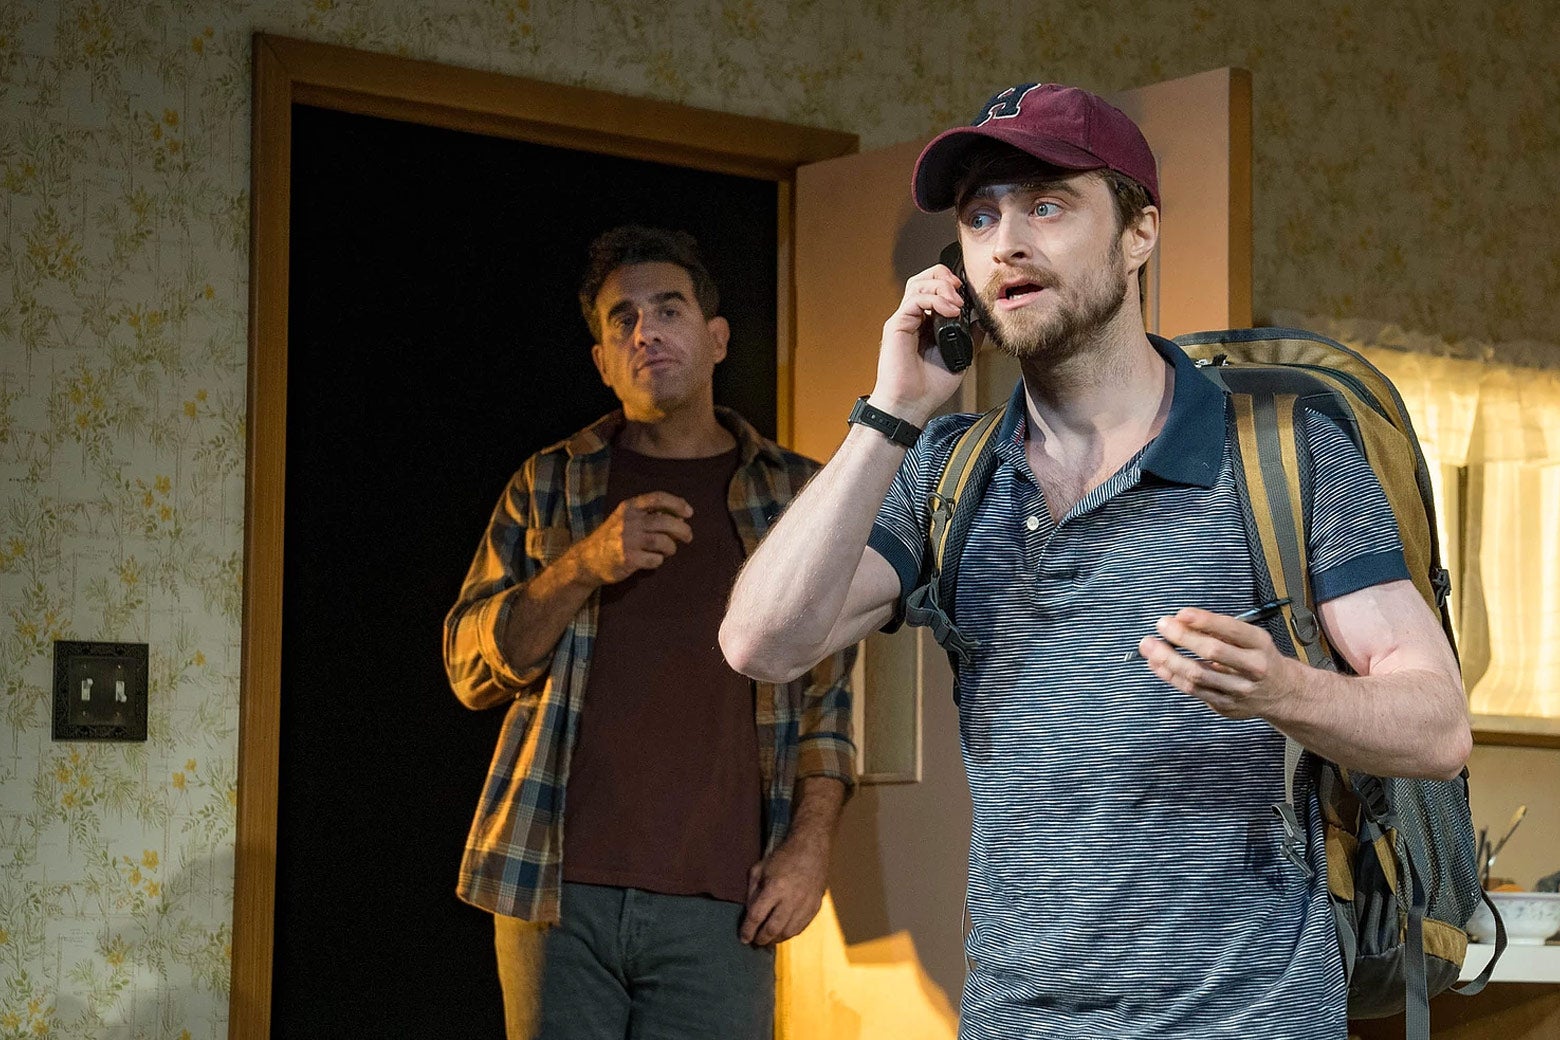 Daniel Radcliffe on the phone with a backpack on. Bobby Cannavale stands in the doorway.